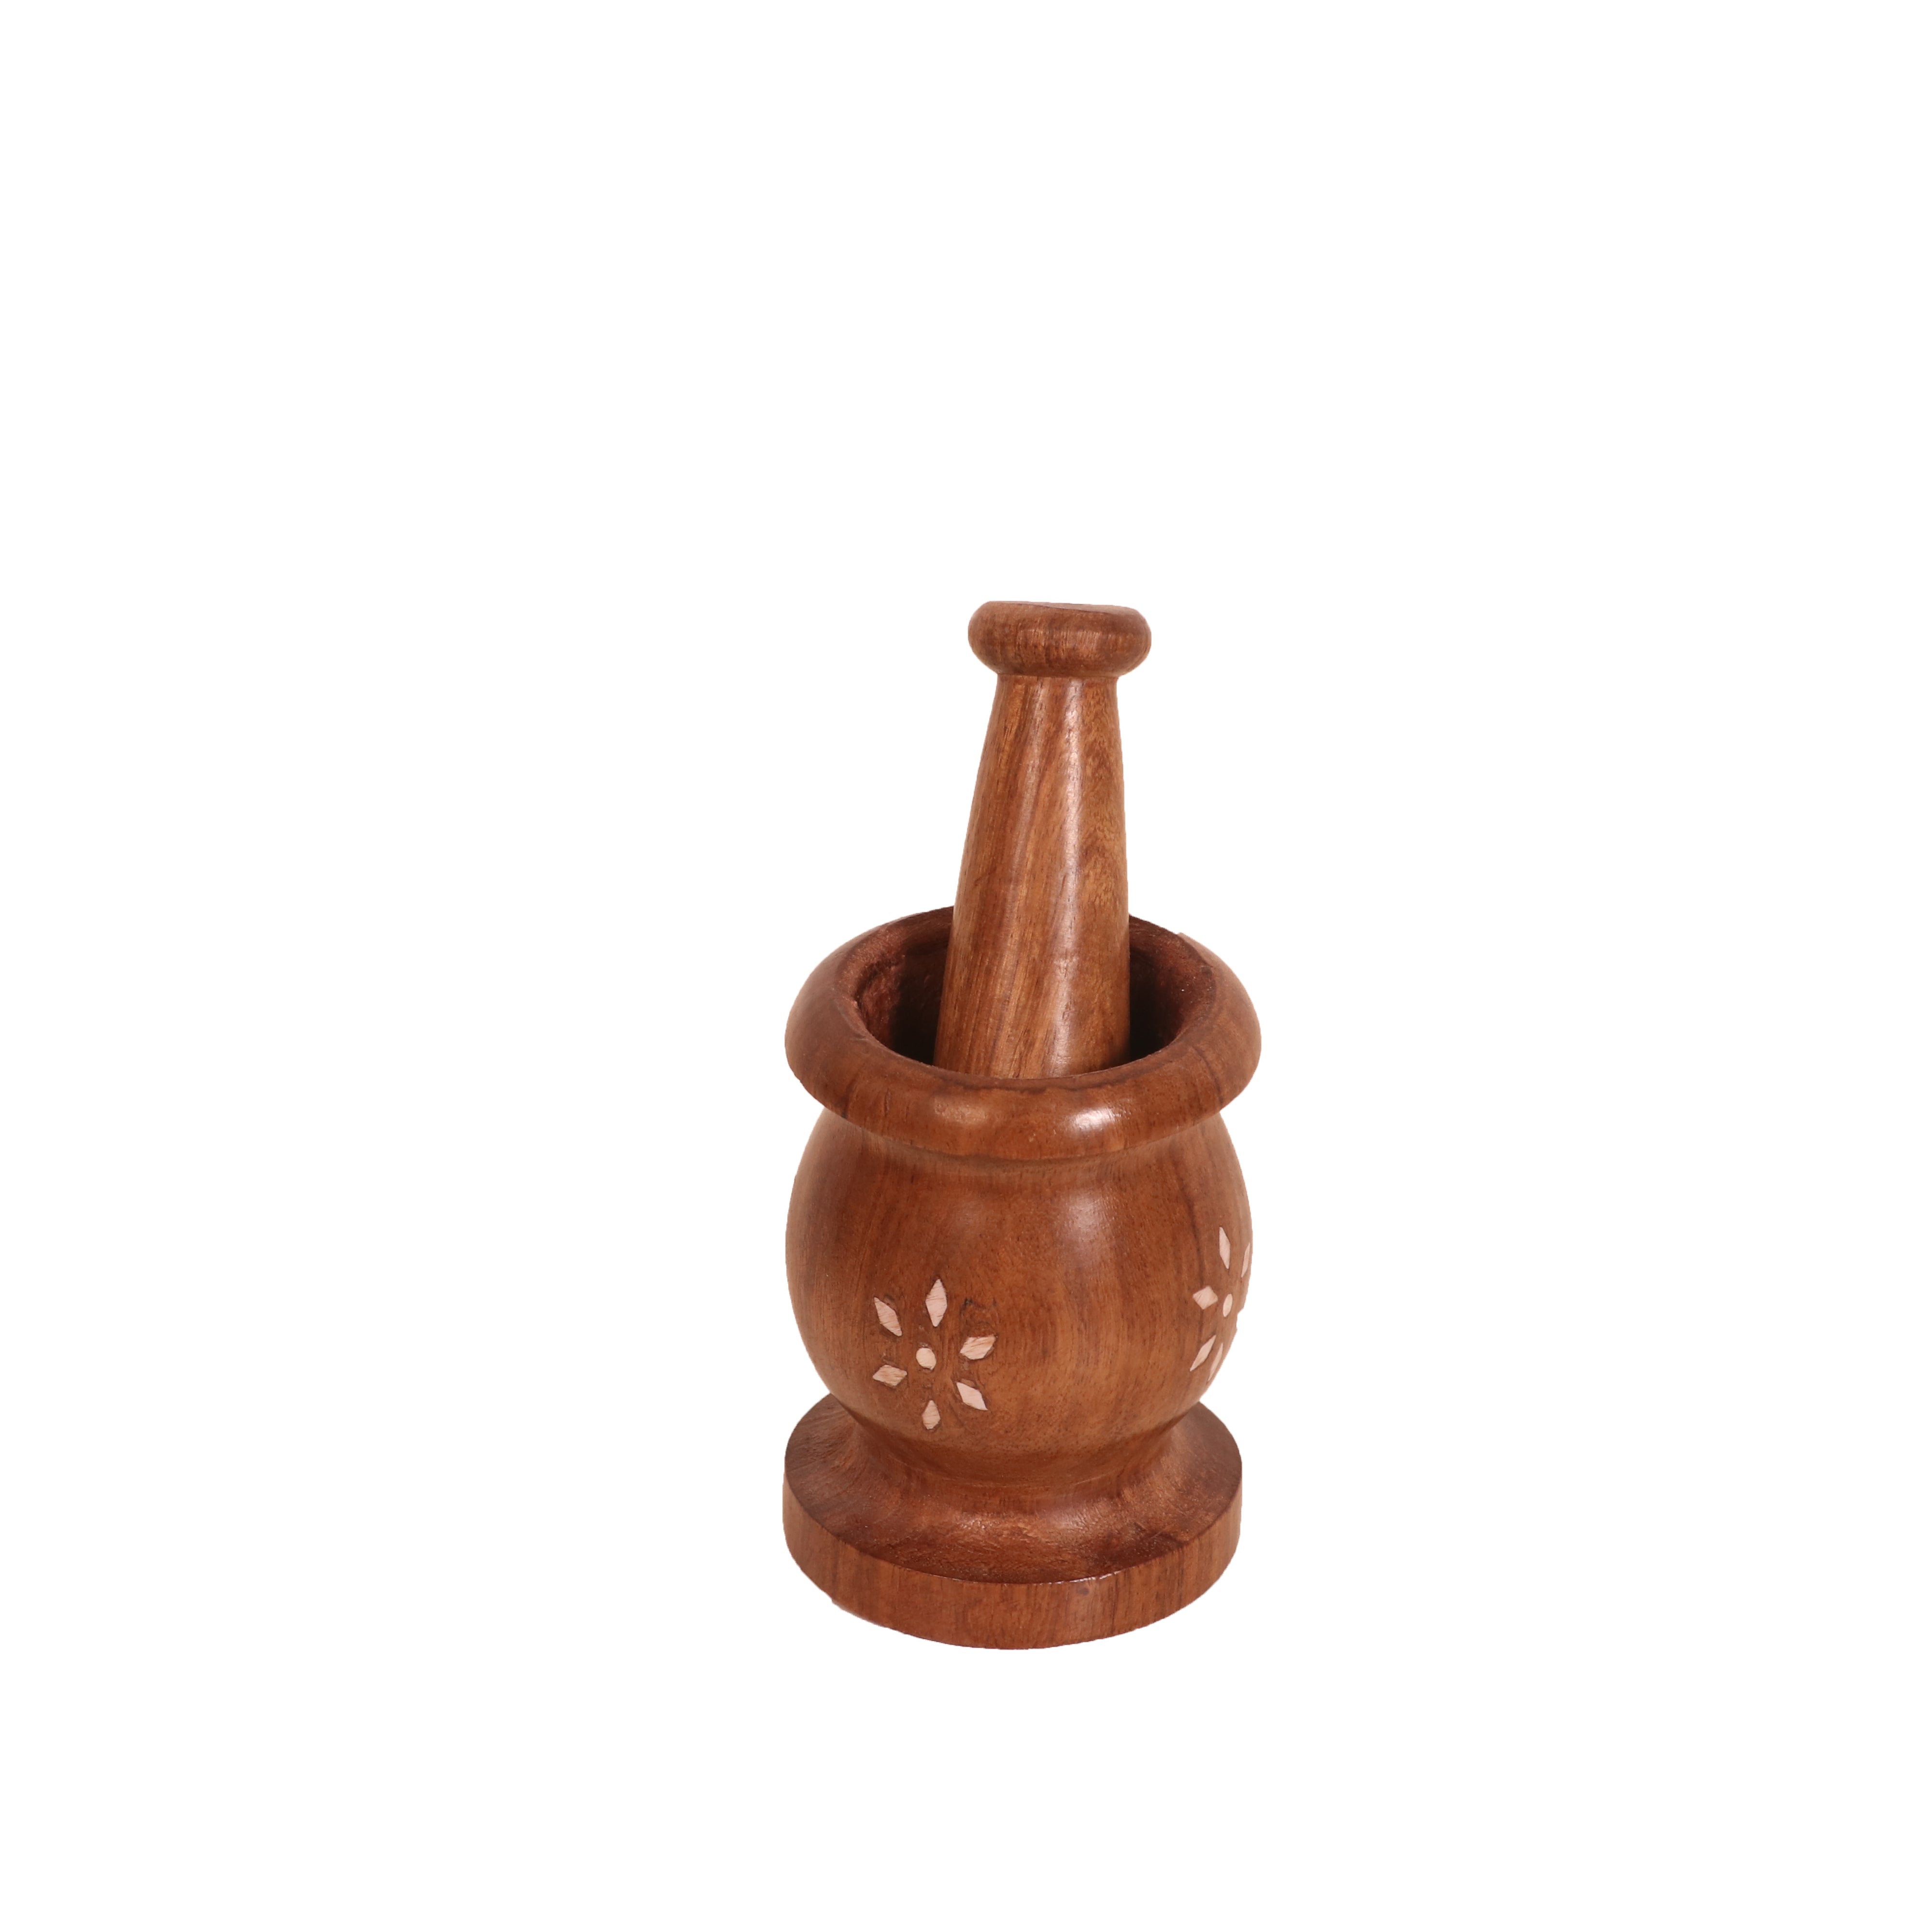 Wooden Classical spherical Grinder Small Grinder